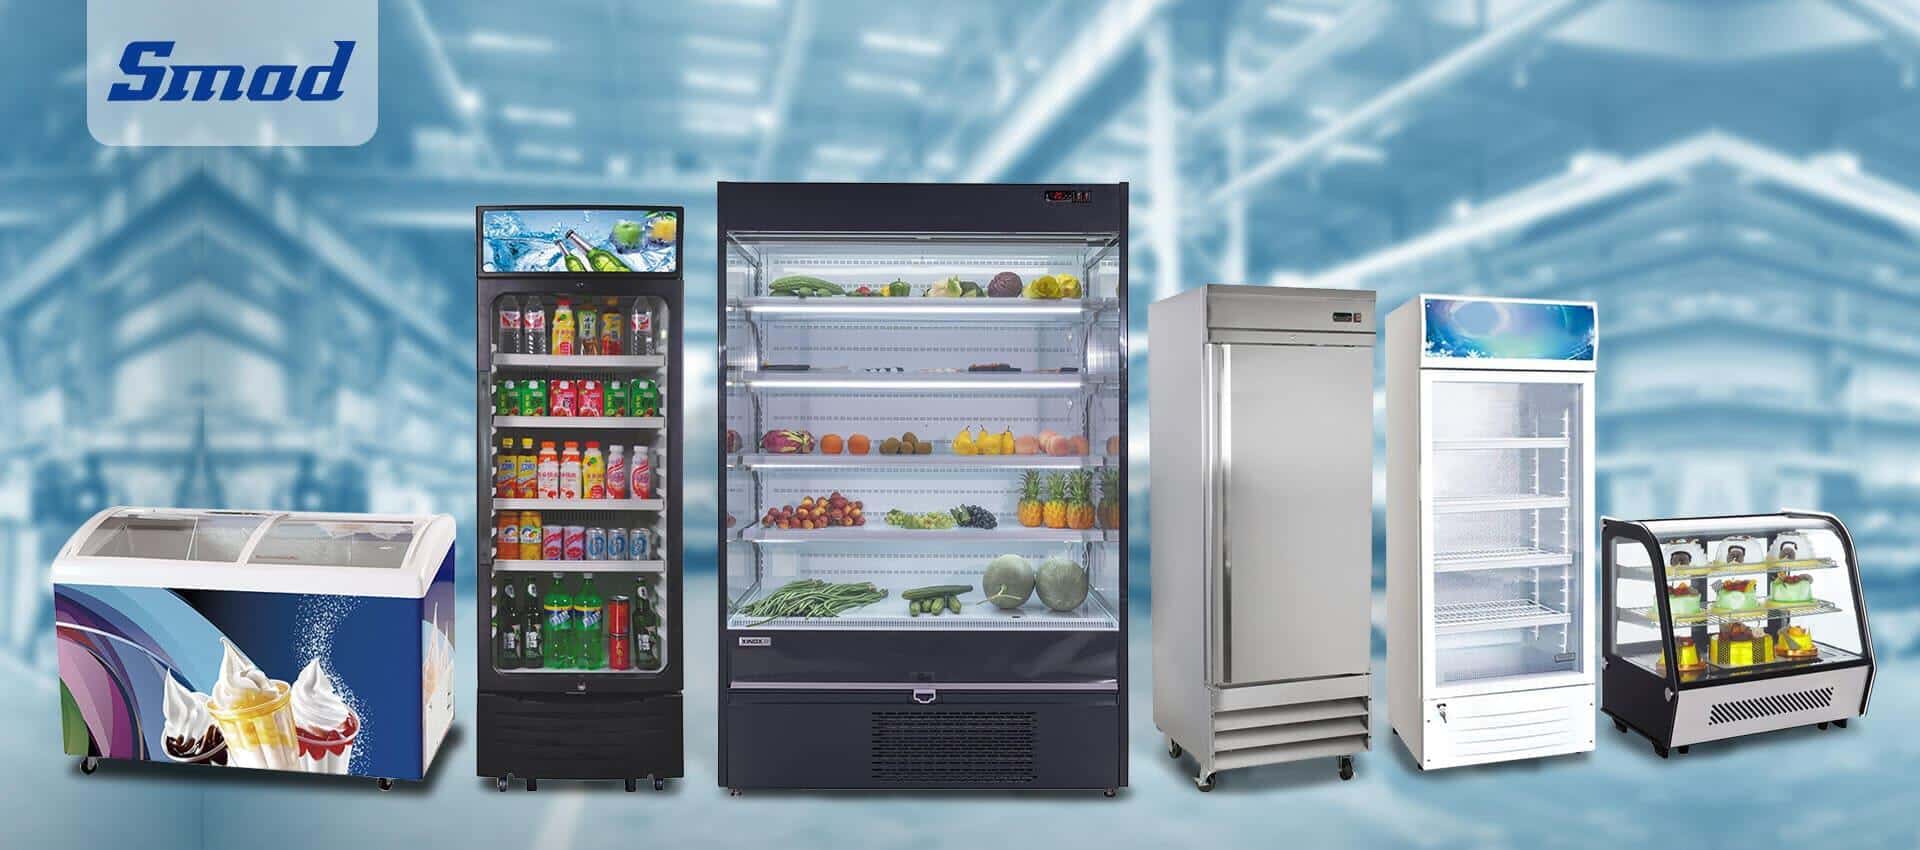 Sell cake display fridge in Noida | Clasf home-and-garden